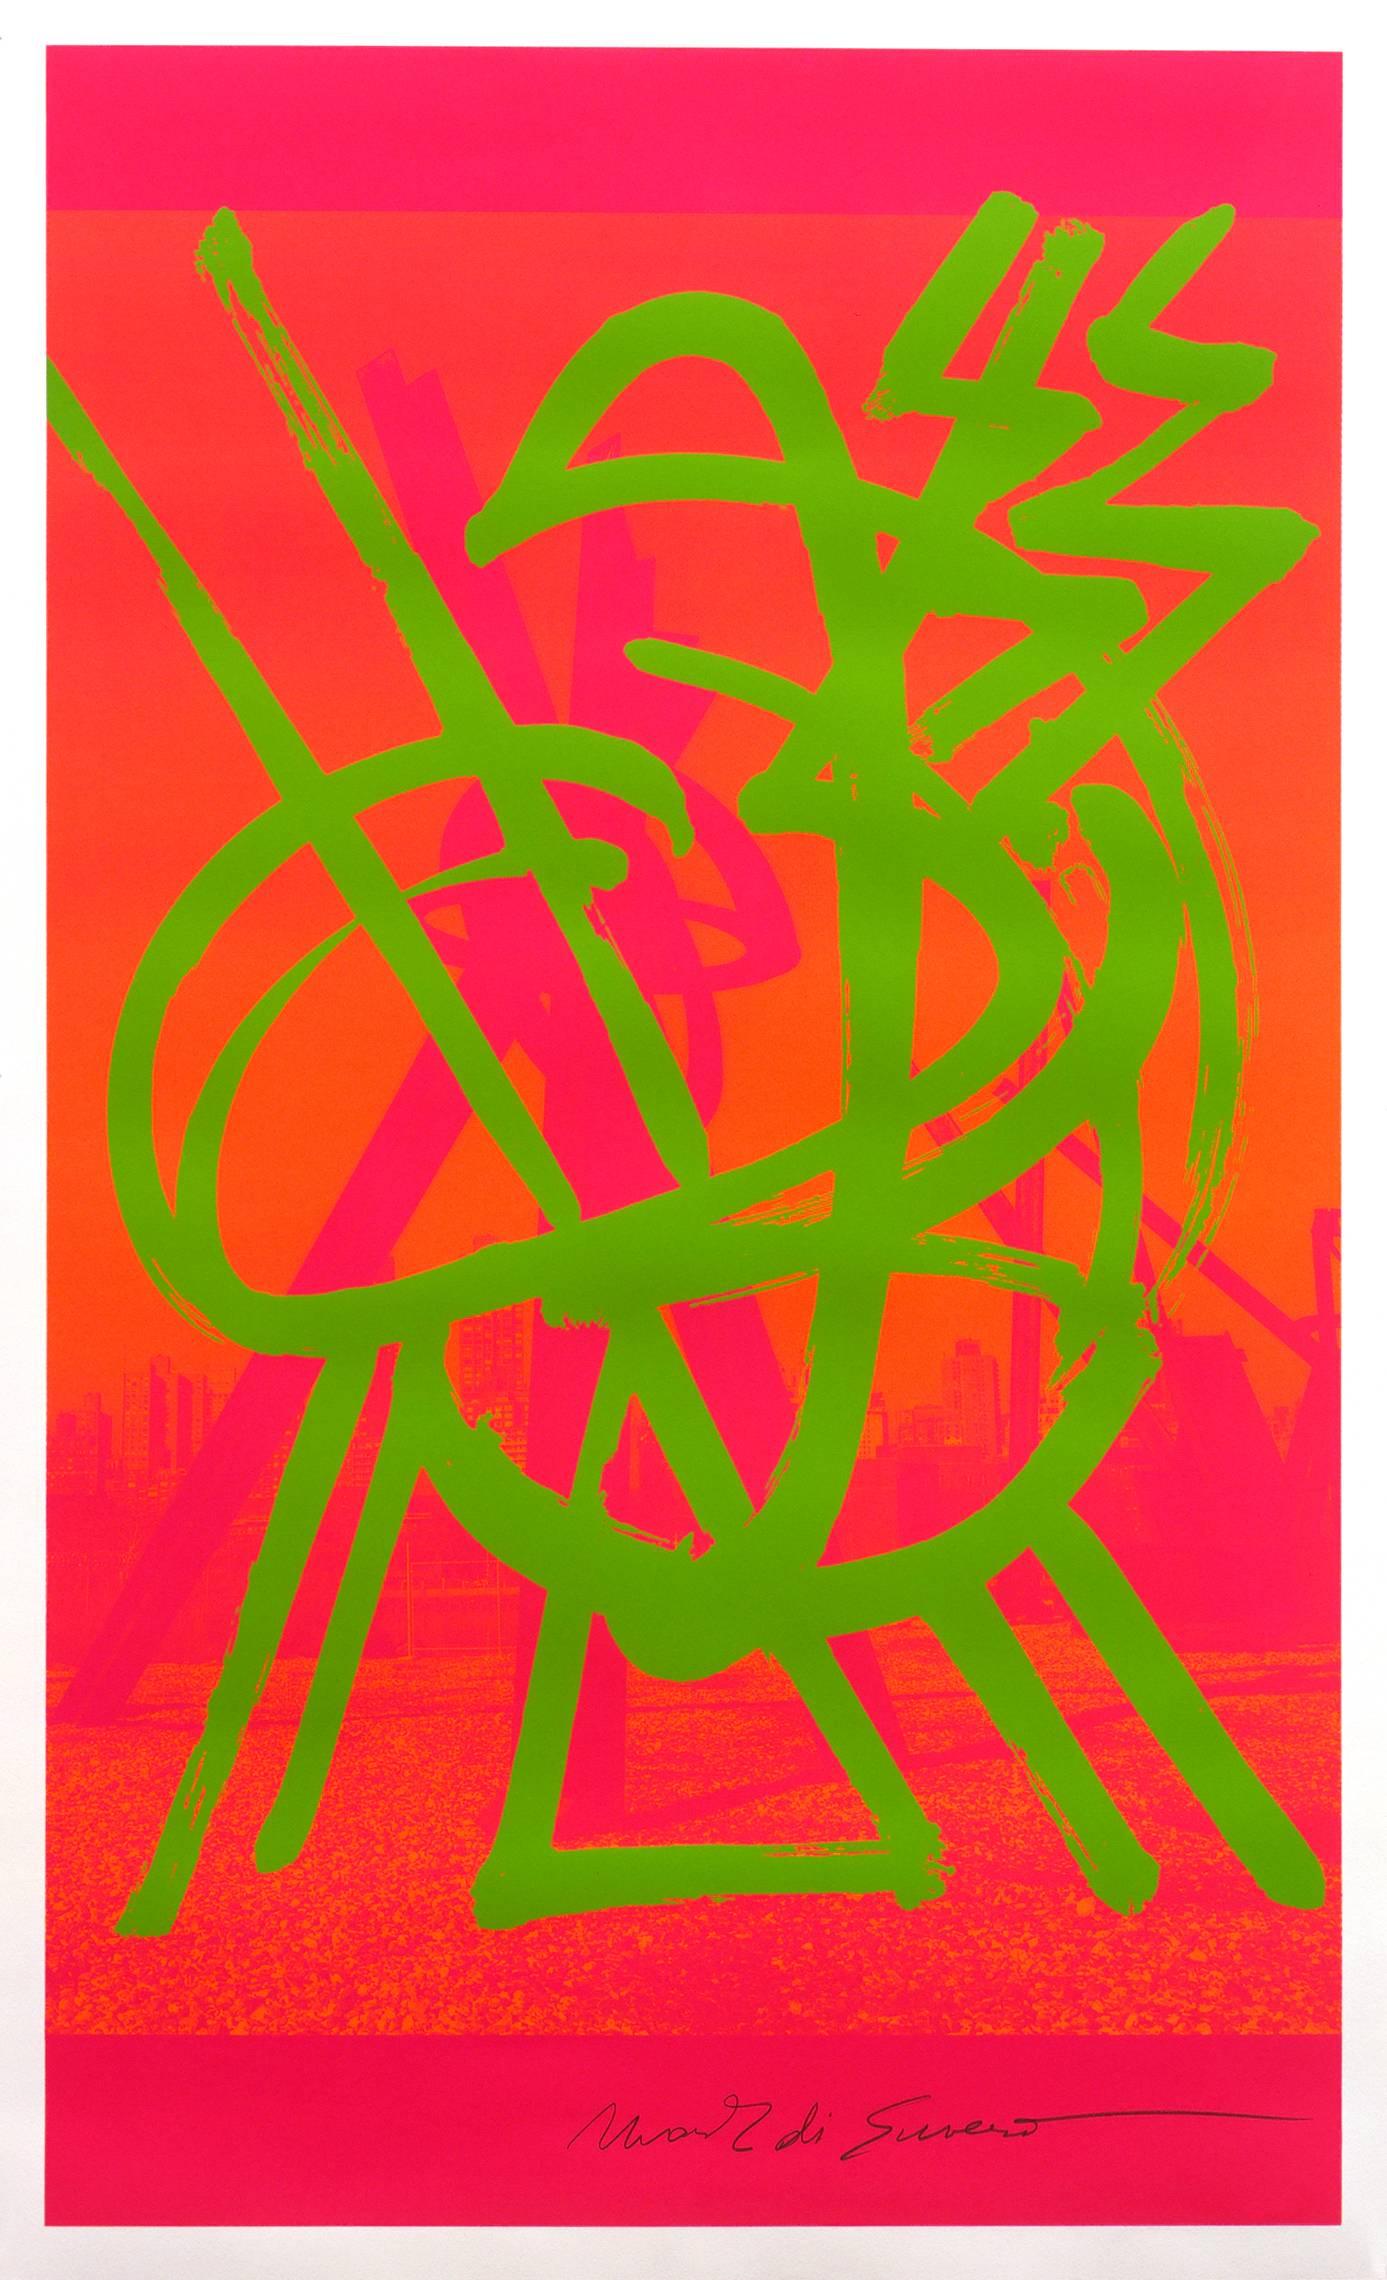 This screen print by Mark di Suvero pops with day-glo colors. Bright green lines on a hot pink and orange background make for a fun piece of art in any room. This print is signed and numbered by the artist. The print comes directly from the